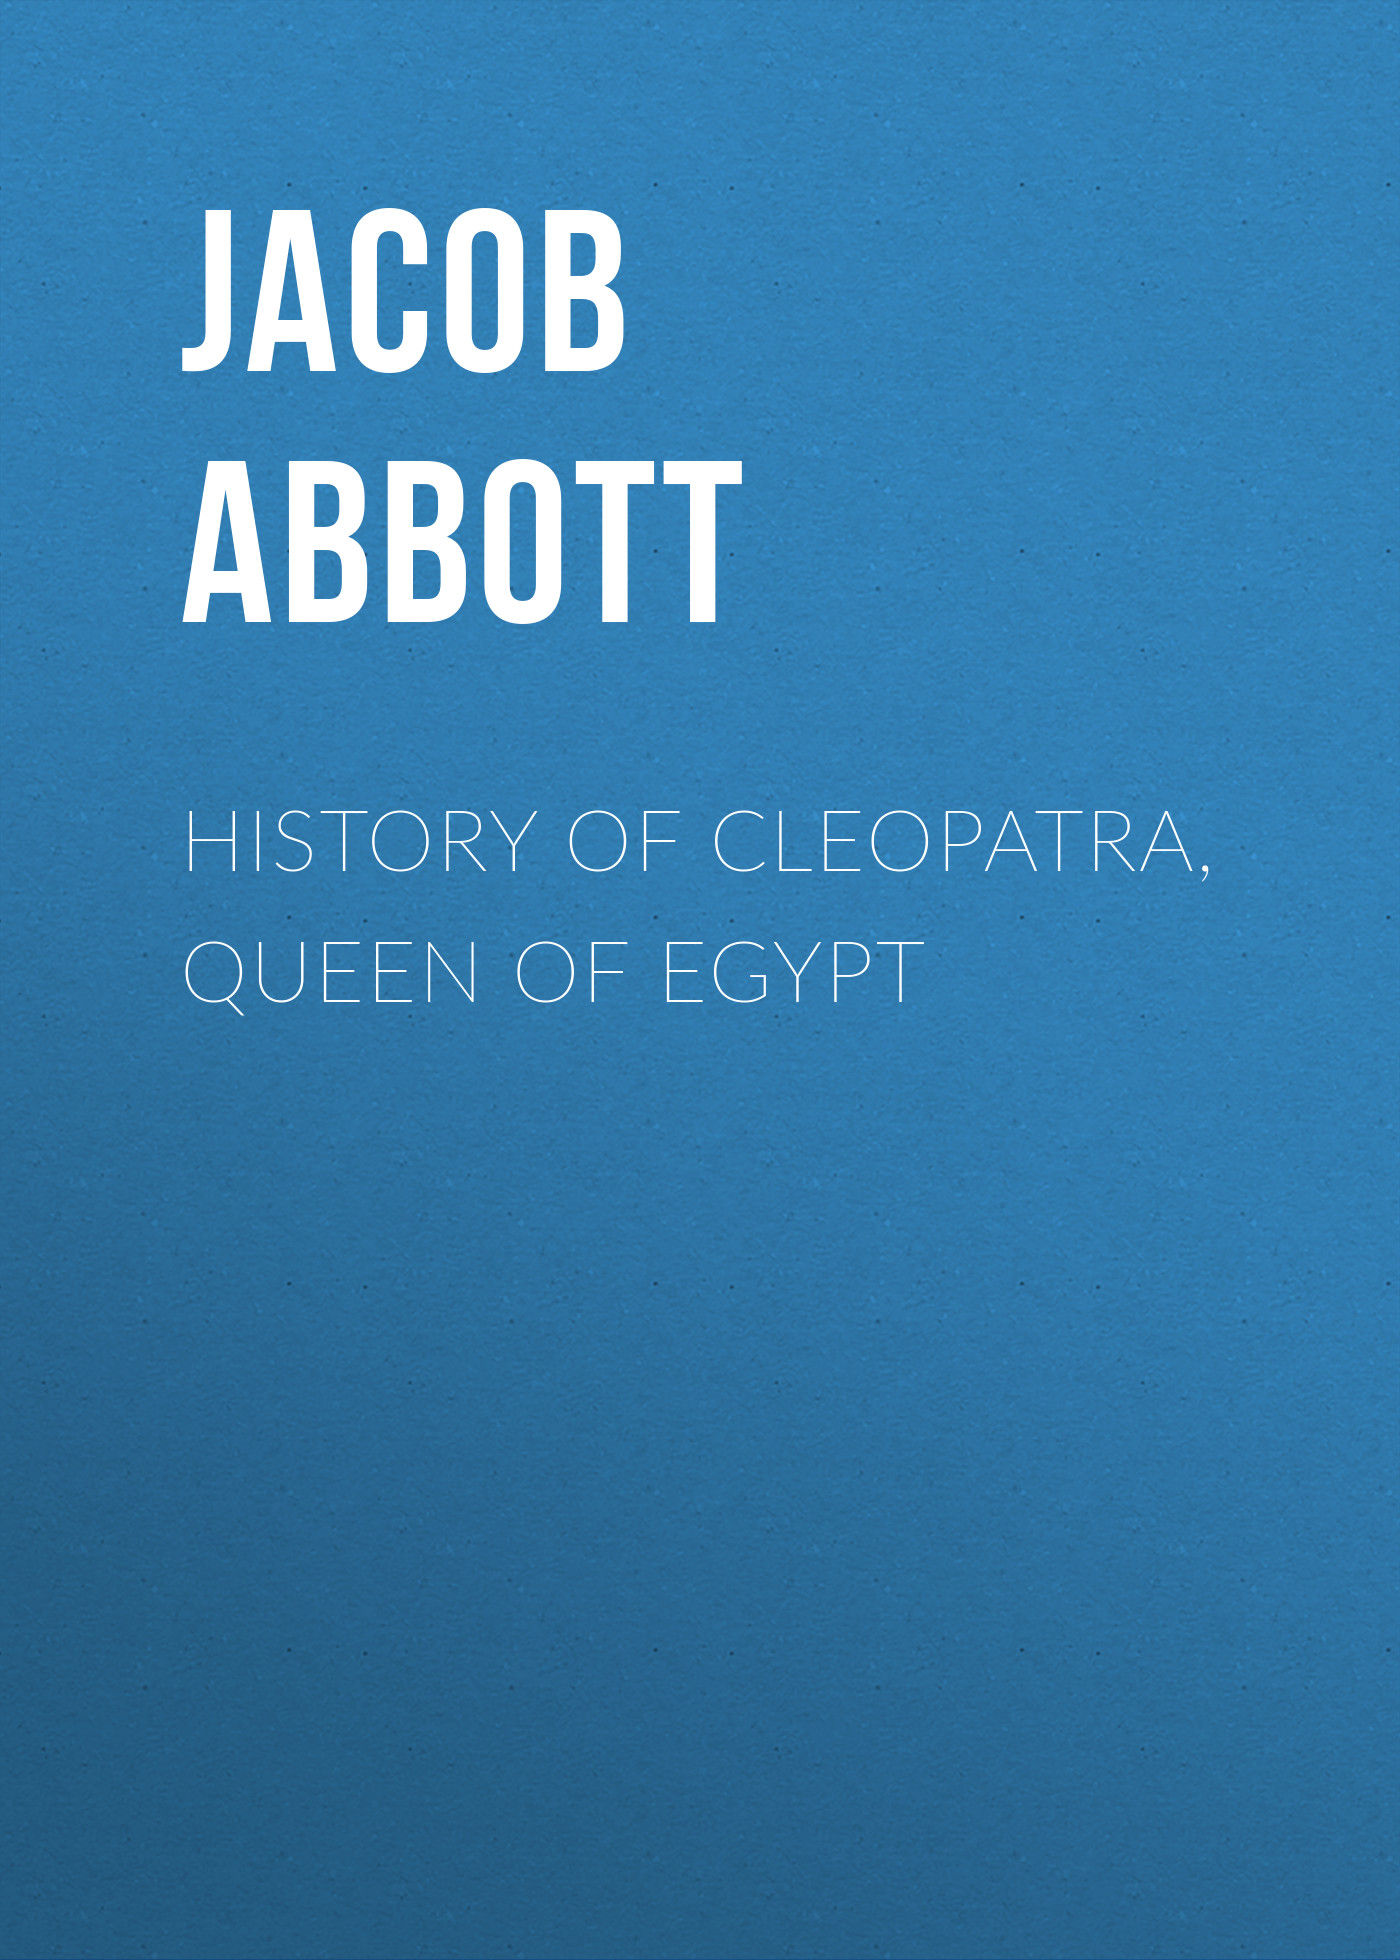 History of Cleopatra, Queen of Egypt